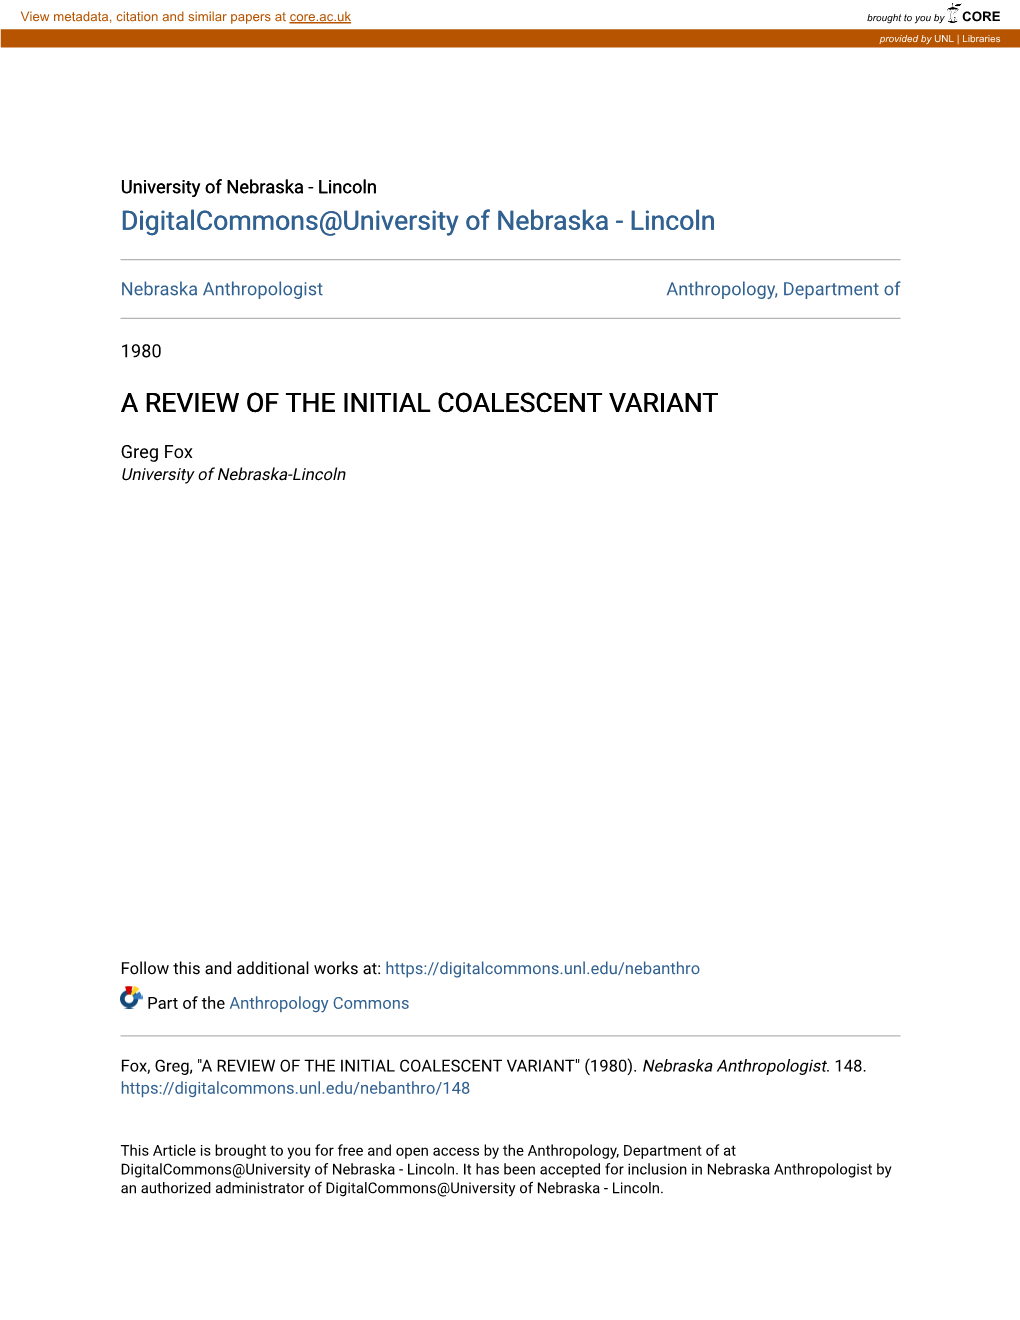 A Review of the Initial Coalescent Variant